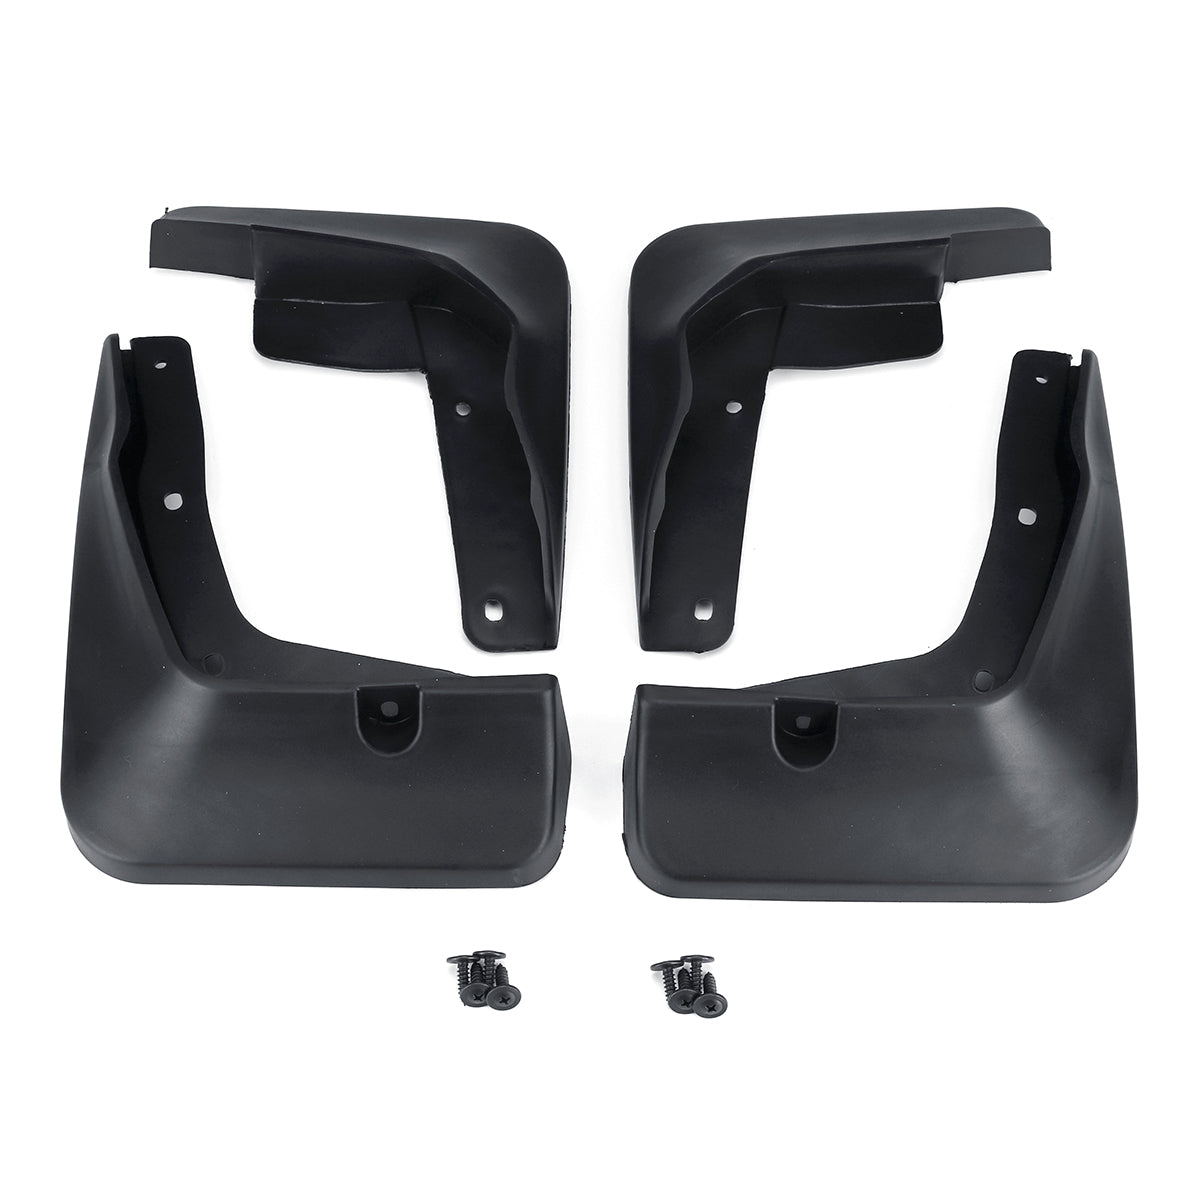 Oshotto Mud Flap (O.E.M Type) For Ford Freestyle (Set of 4)